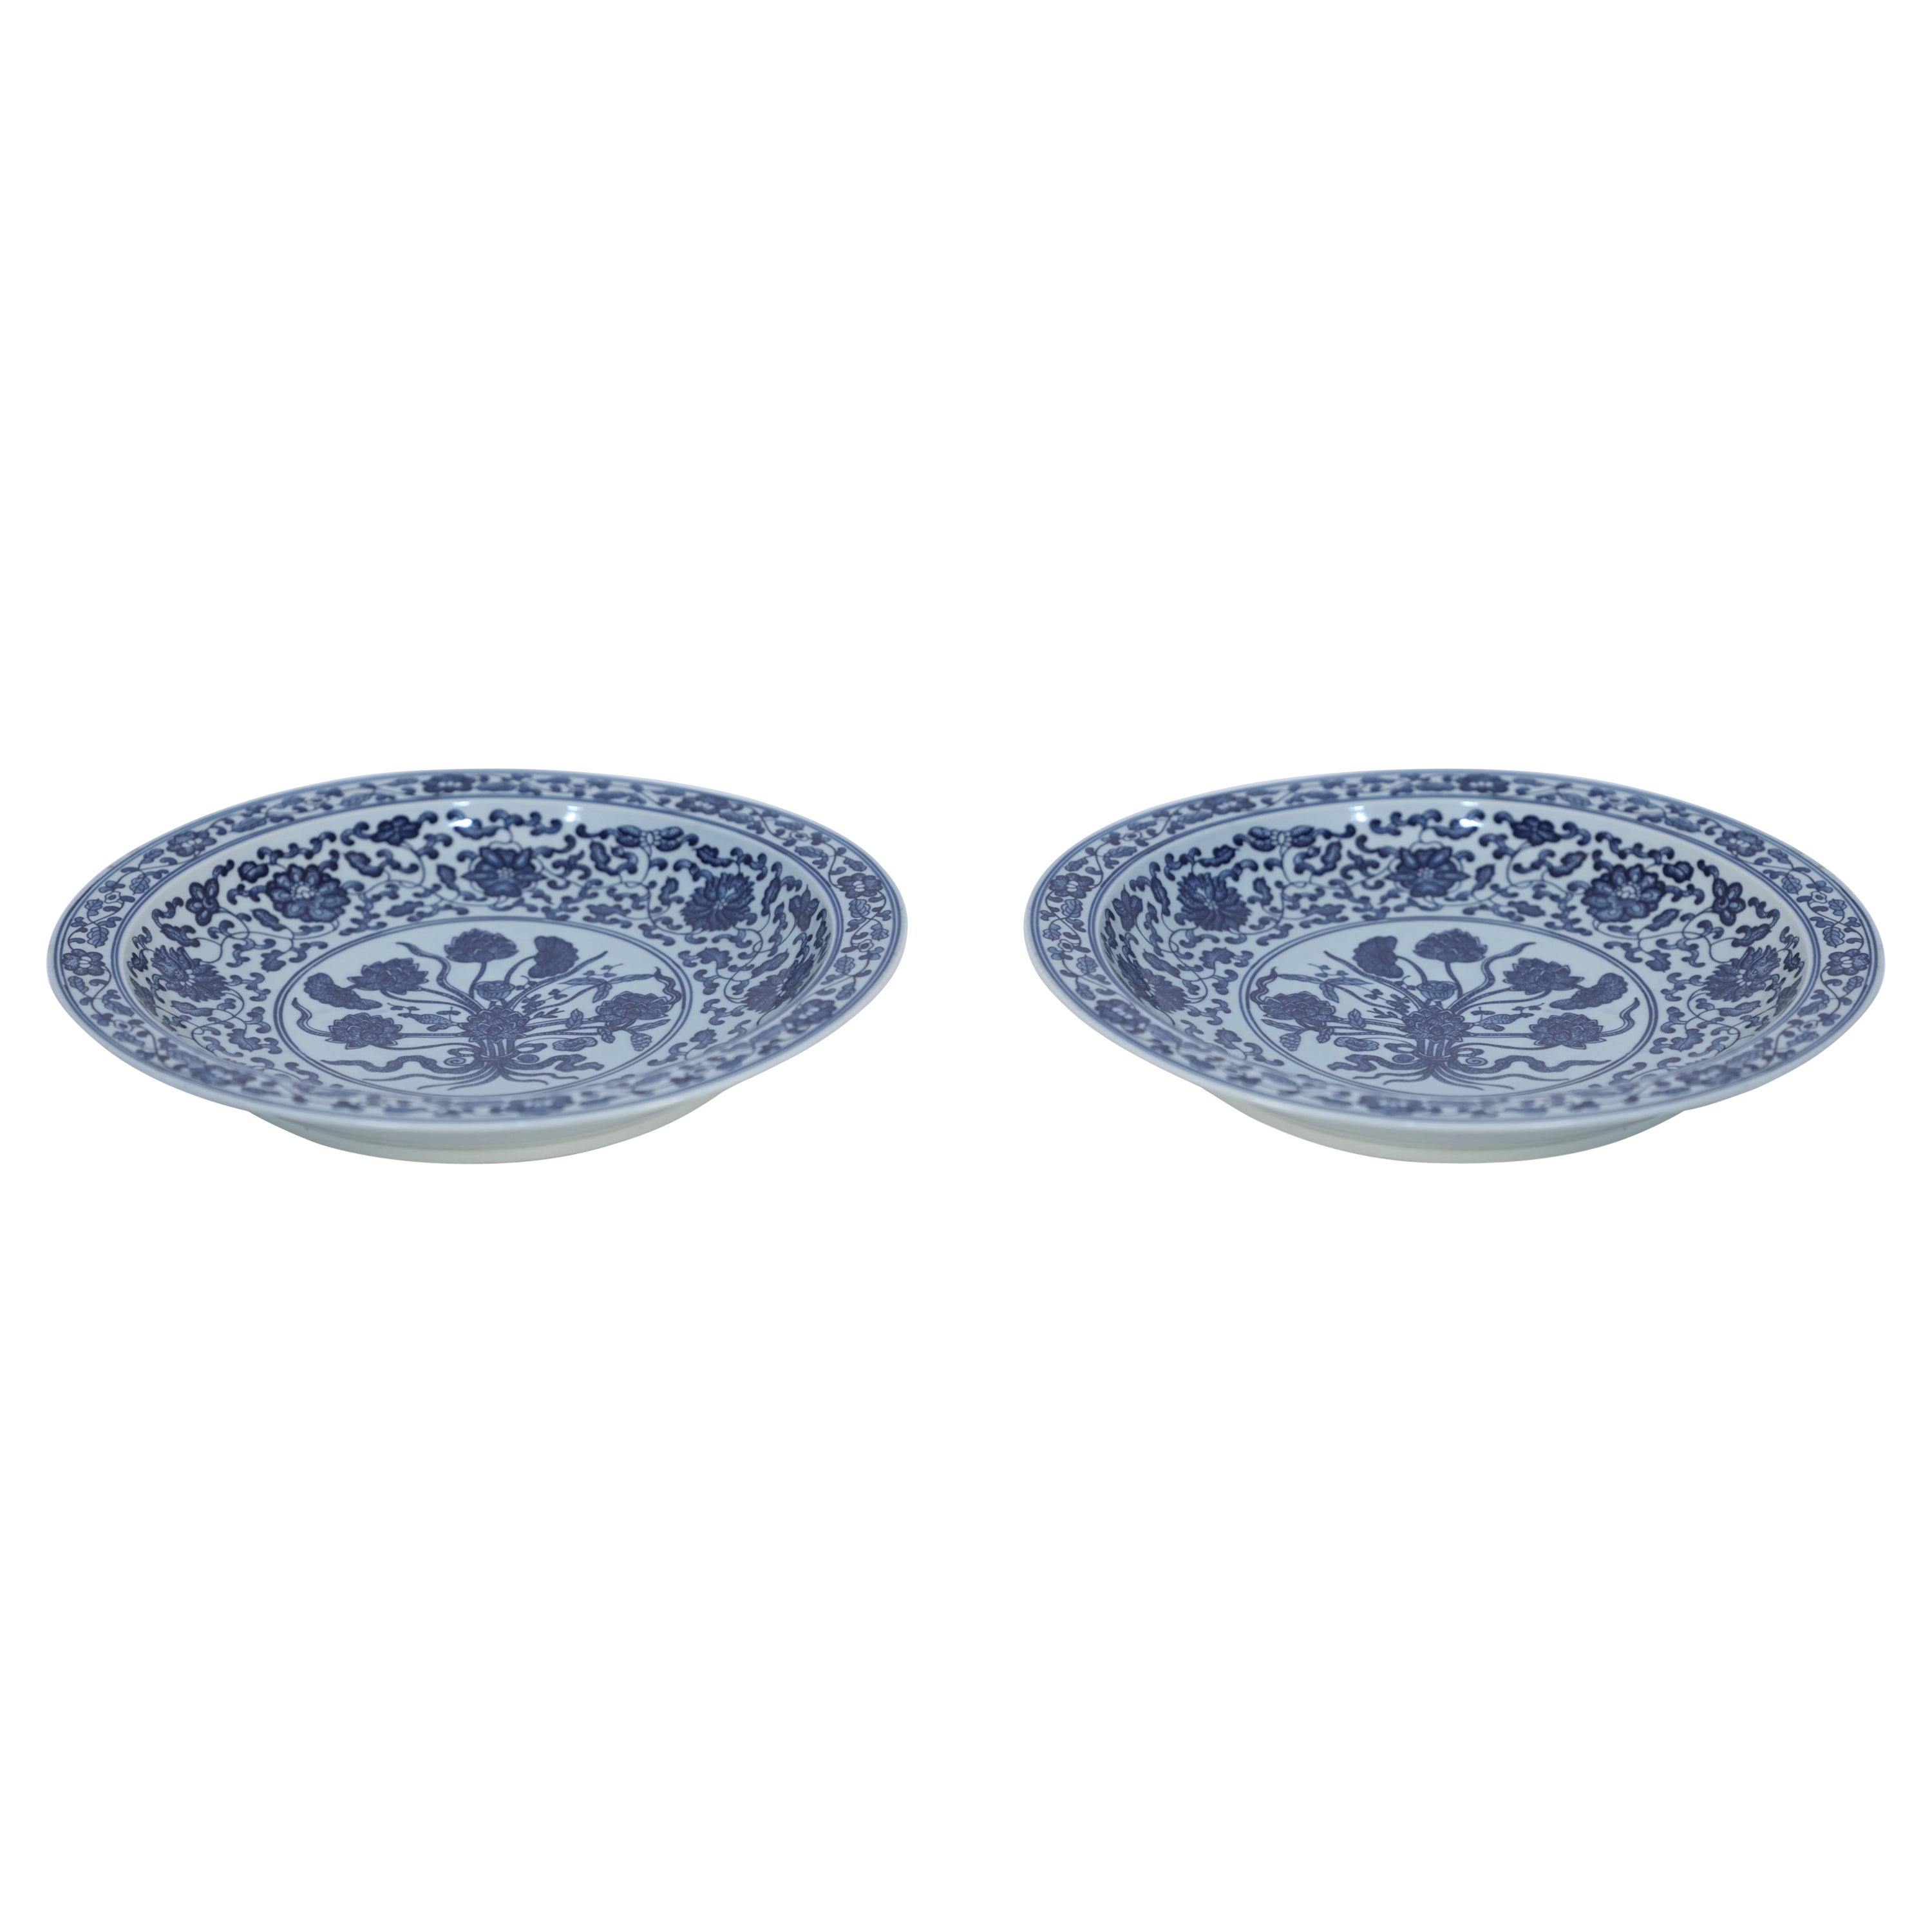 Pair of Chinese White and Blue Floral Decorative Plates